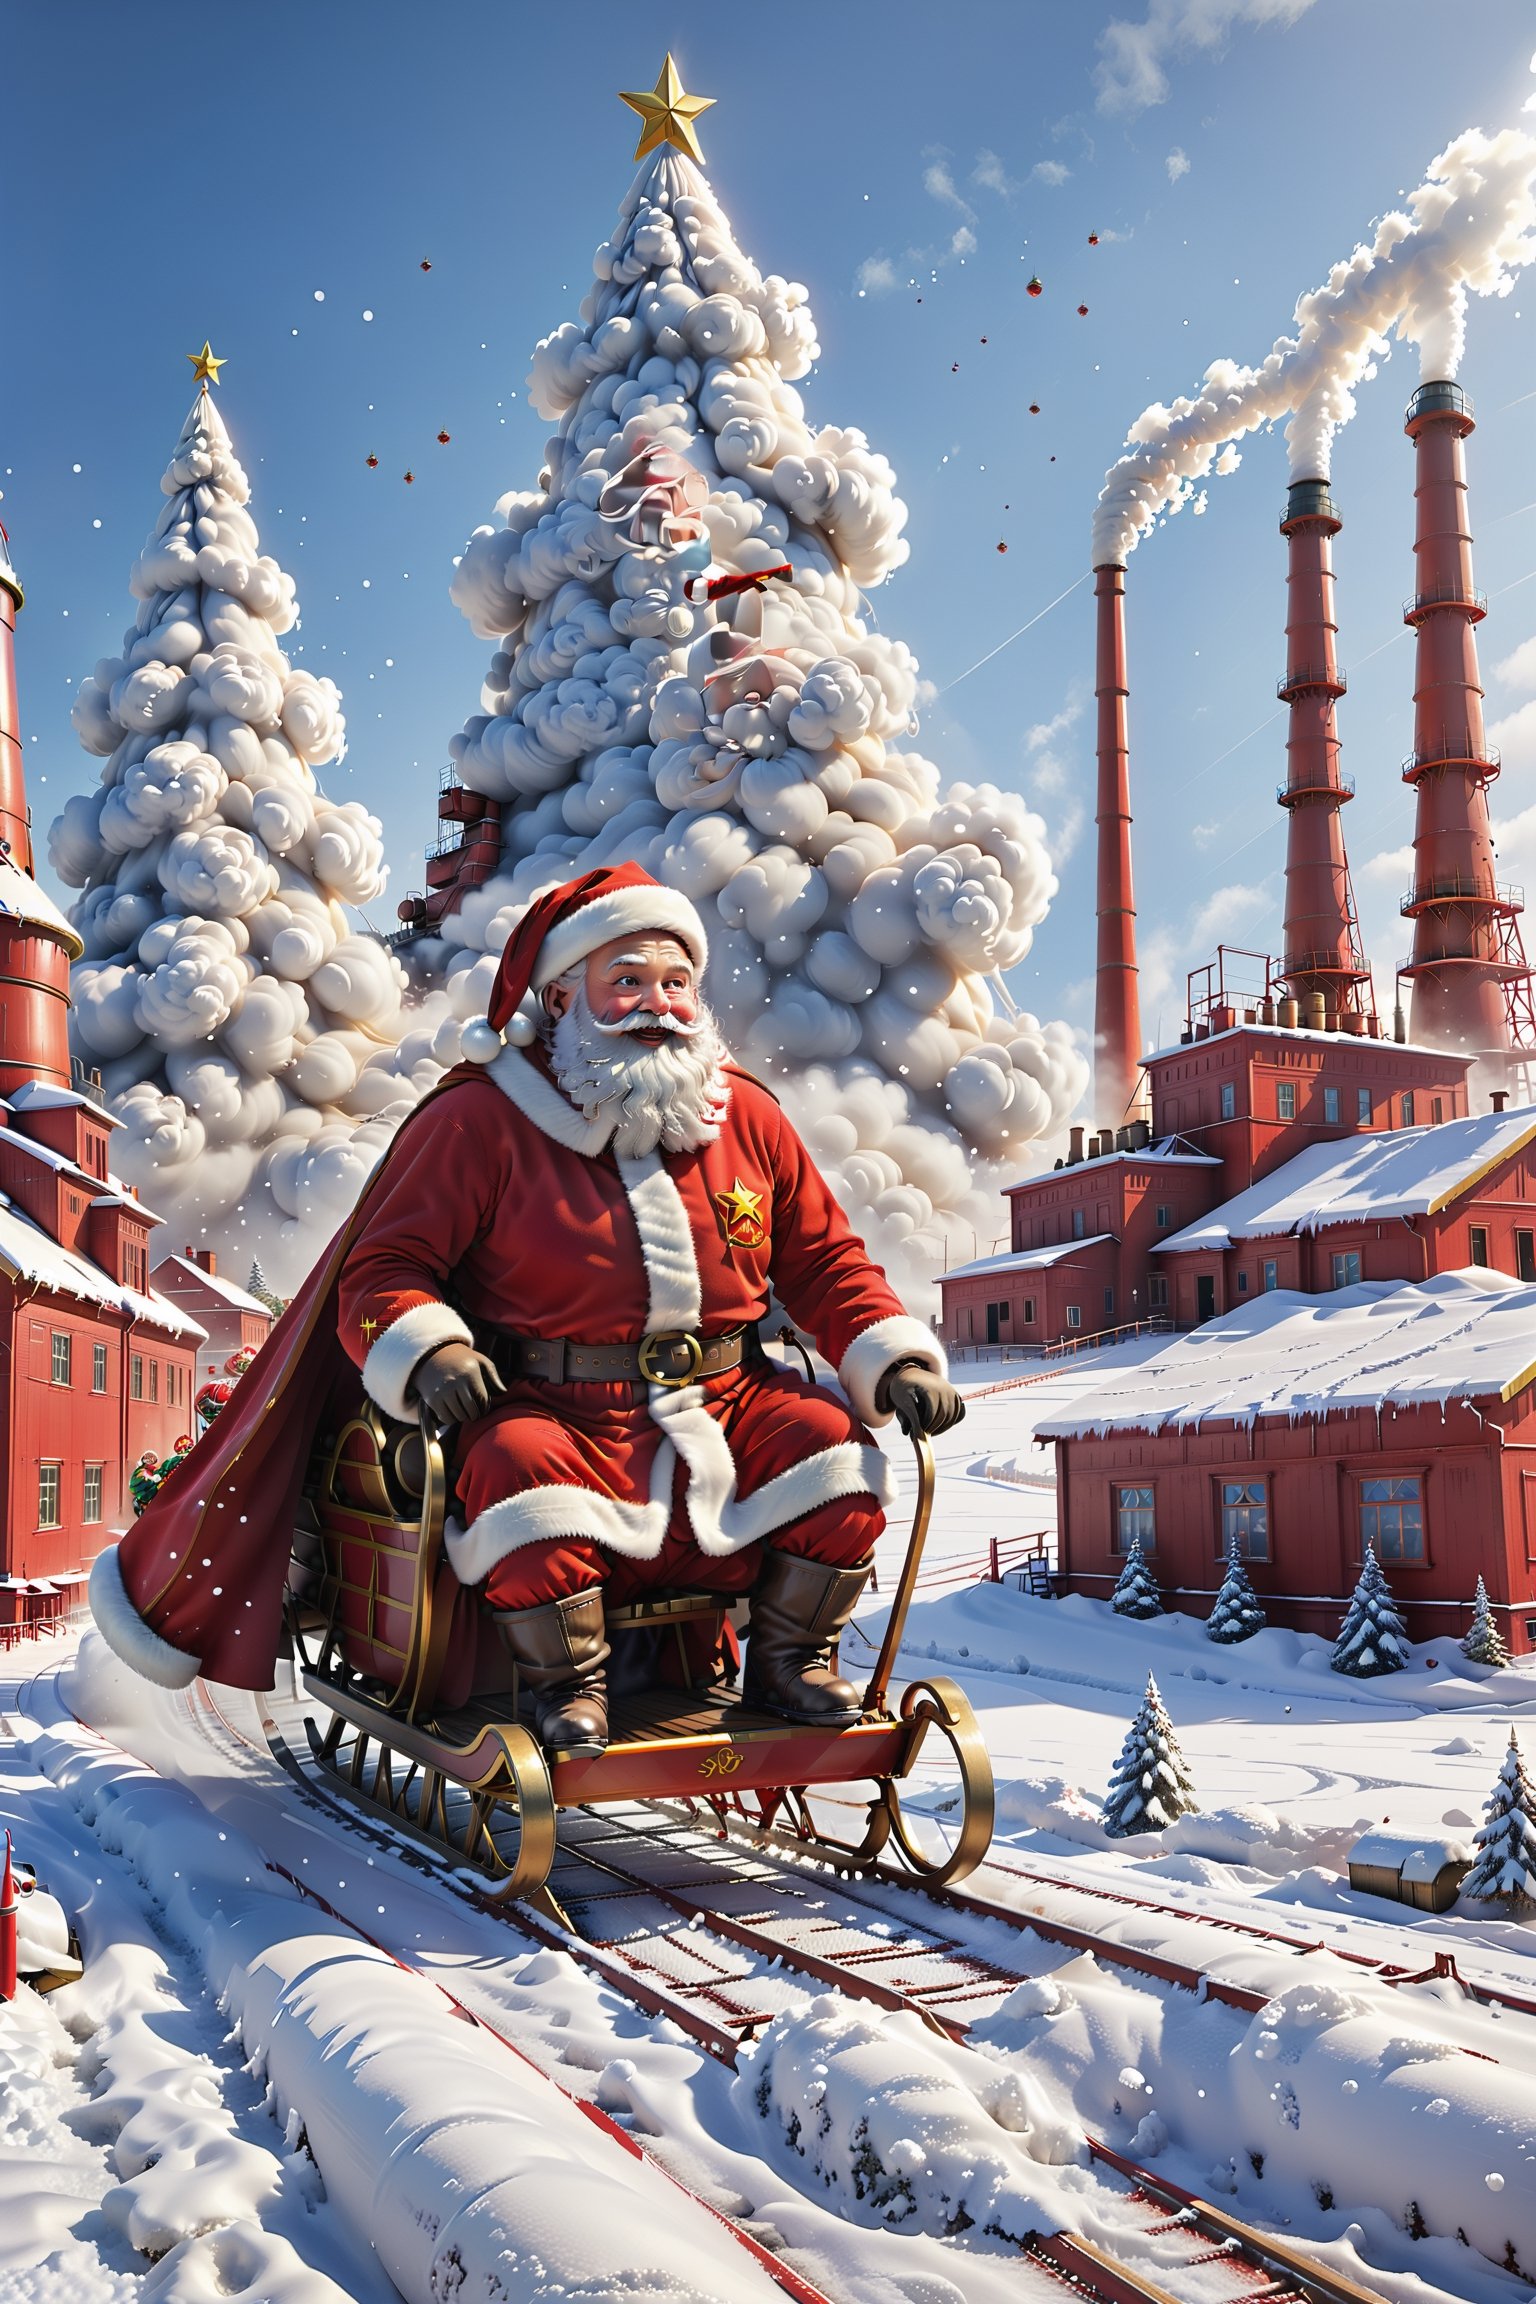 In this unique scene, Santa Claus is in a Soviet heavy industry setting and he is sledding across the industrial landscape, adding an exotic touch to this unique Christmas season.

In the background of the Soviet Heavy Industries area, towering factory chimneys emit white steam, while hot air and snowflakes intermingle. The buildings in the industrial area are covered in snow and ice, presenting a sense of the harshness and vicissitudes of a Soviet winter.

Santa Claus is dressed in thick red and white clothing, a woolen hat and cape, with the handle of his sleigh cart firmly in his hand. The sleigh may have been specially designed and decorated with traditional Soviet elements, such as the red star and the hammer and sickle, as well as some Christmas motifs, creating a unique mix of styles.

The sleigh glides on the thick snow, leaving a clear trail. Behind Santa Claus flies the Soviet flag, as if dancing in the cold wind. His expression is both solemn and full of joy, as if he has found a special Christmas joy in this cold environment.

The whole picture has the warmth of Christmas, but also incorporates the unique winter scene of the Soviet Union, showing a unique and cozy scene that combines tradition with the exotic.